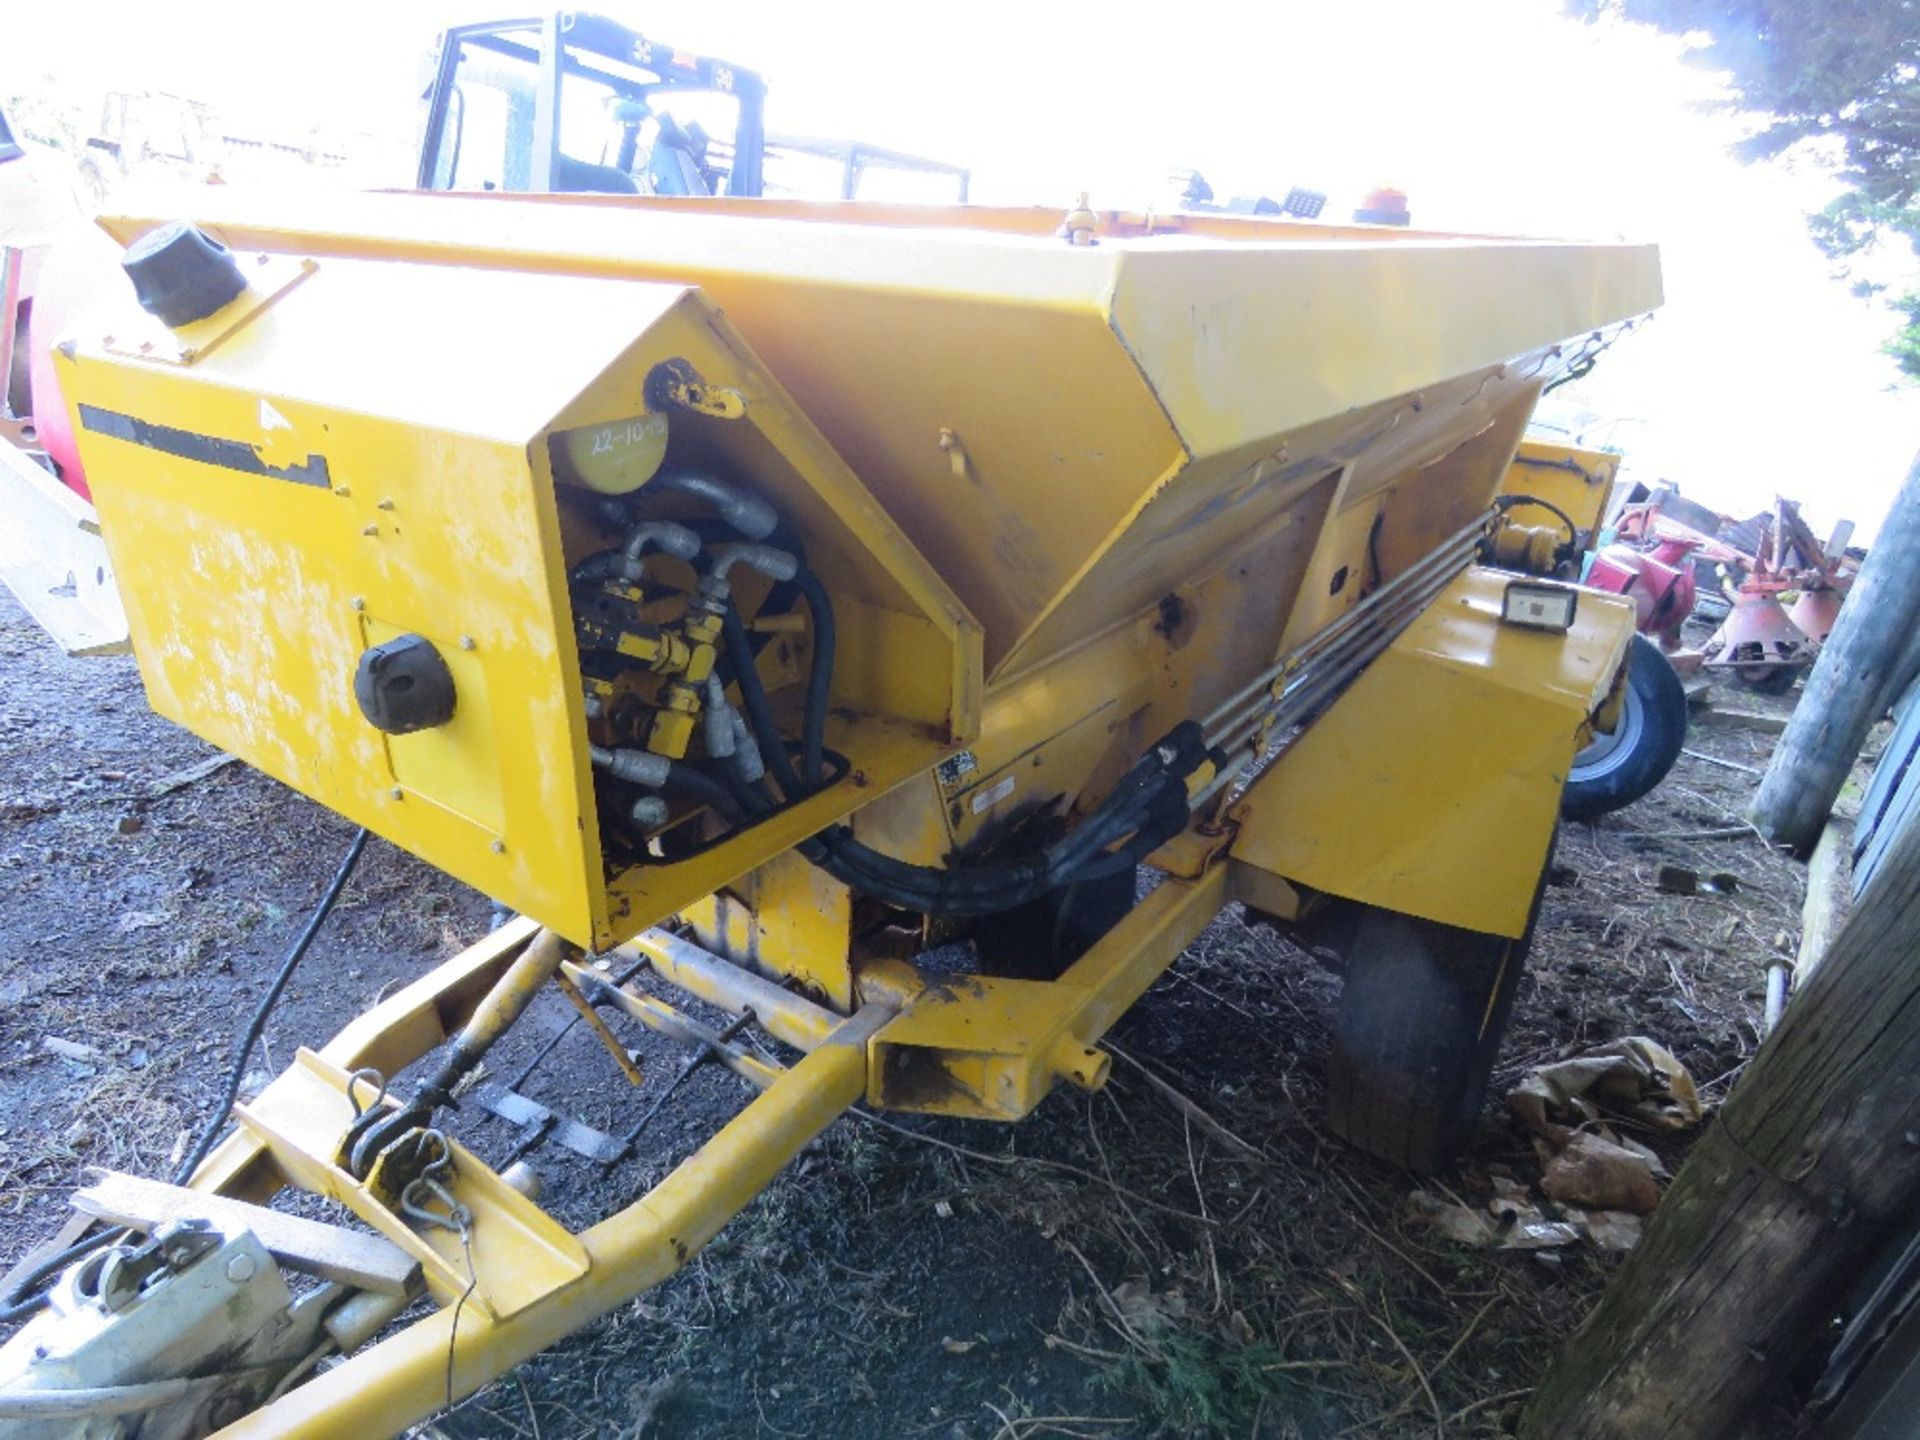 CHARITY LOT!! ECON SINGLE AXLED TOWED SALT SPREADER WITH WHEEL DRIVEN HYDRAULIC SYSTEM. UNUSED FOR - Image 4 of 14